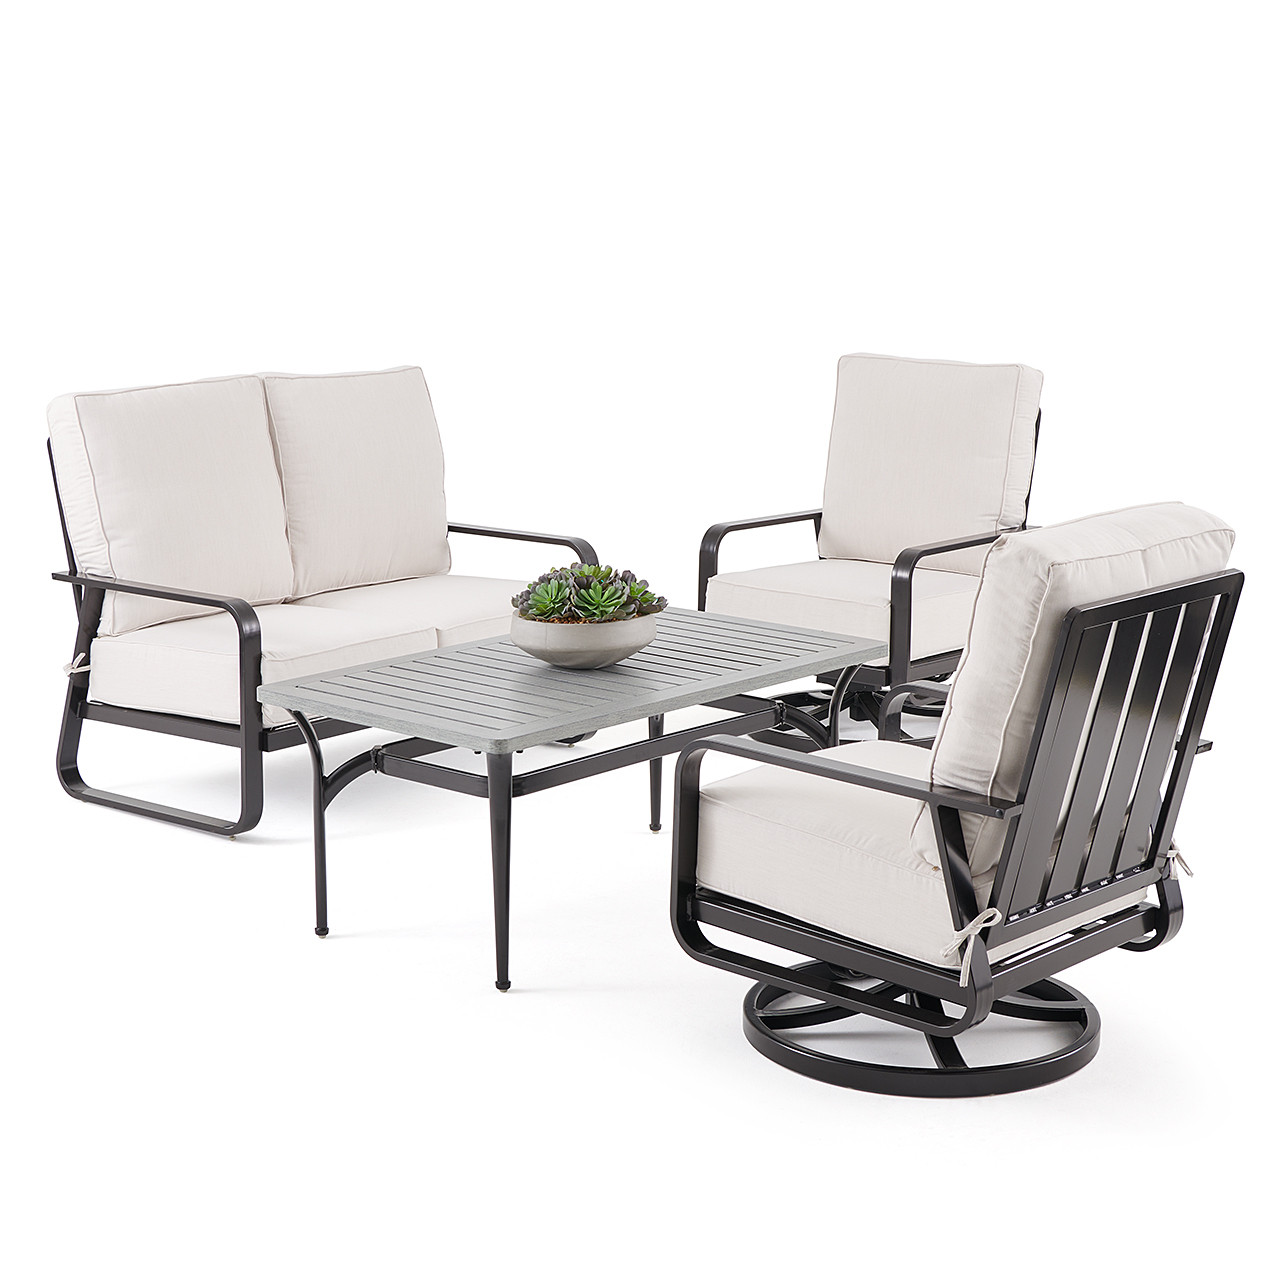 Metro Meteor Aluminum with Cushions 4 Pc. Loveseat Group + Swivel Club Chairs + 52 x 30 in. Slat Top Coffee Table